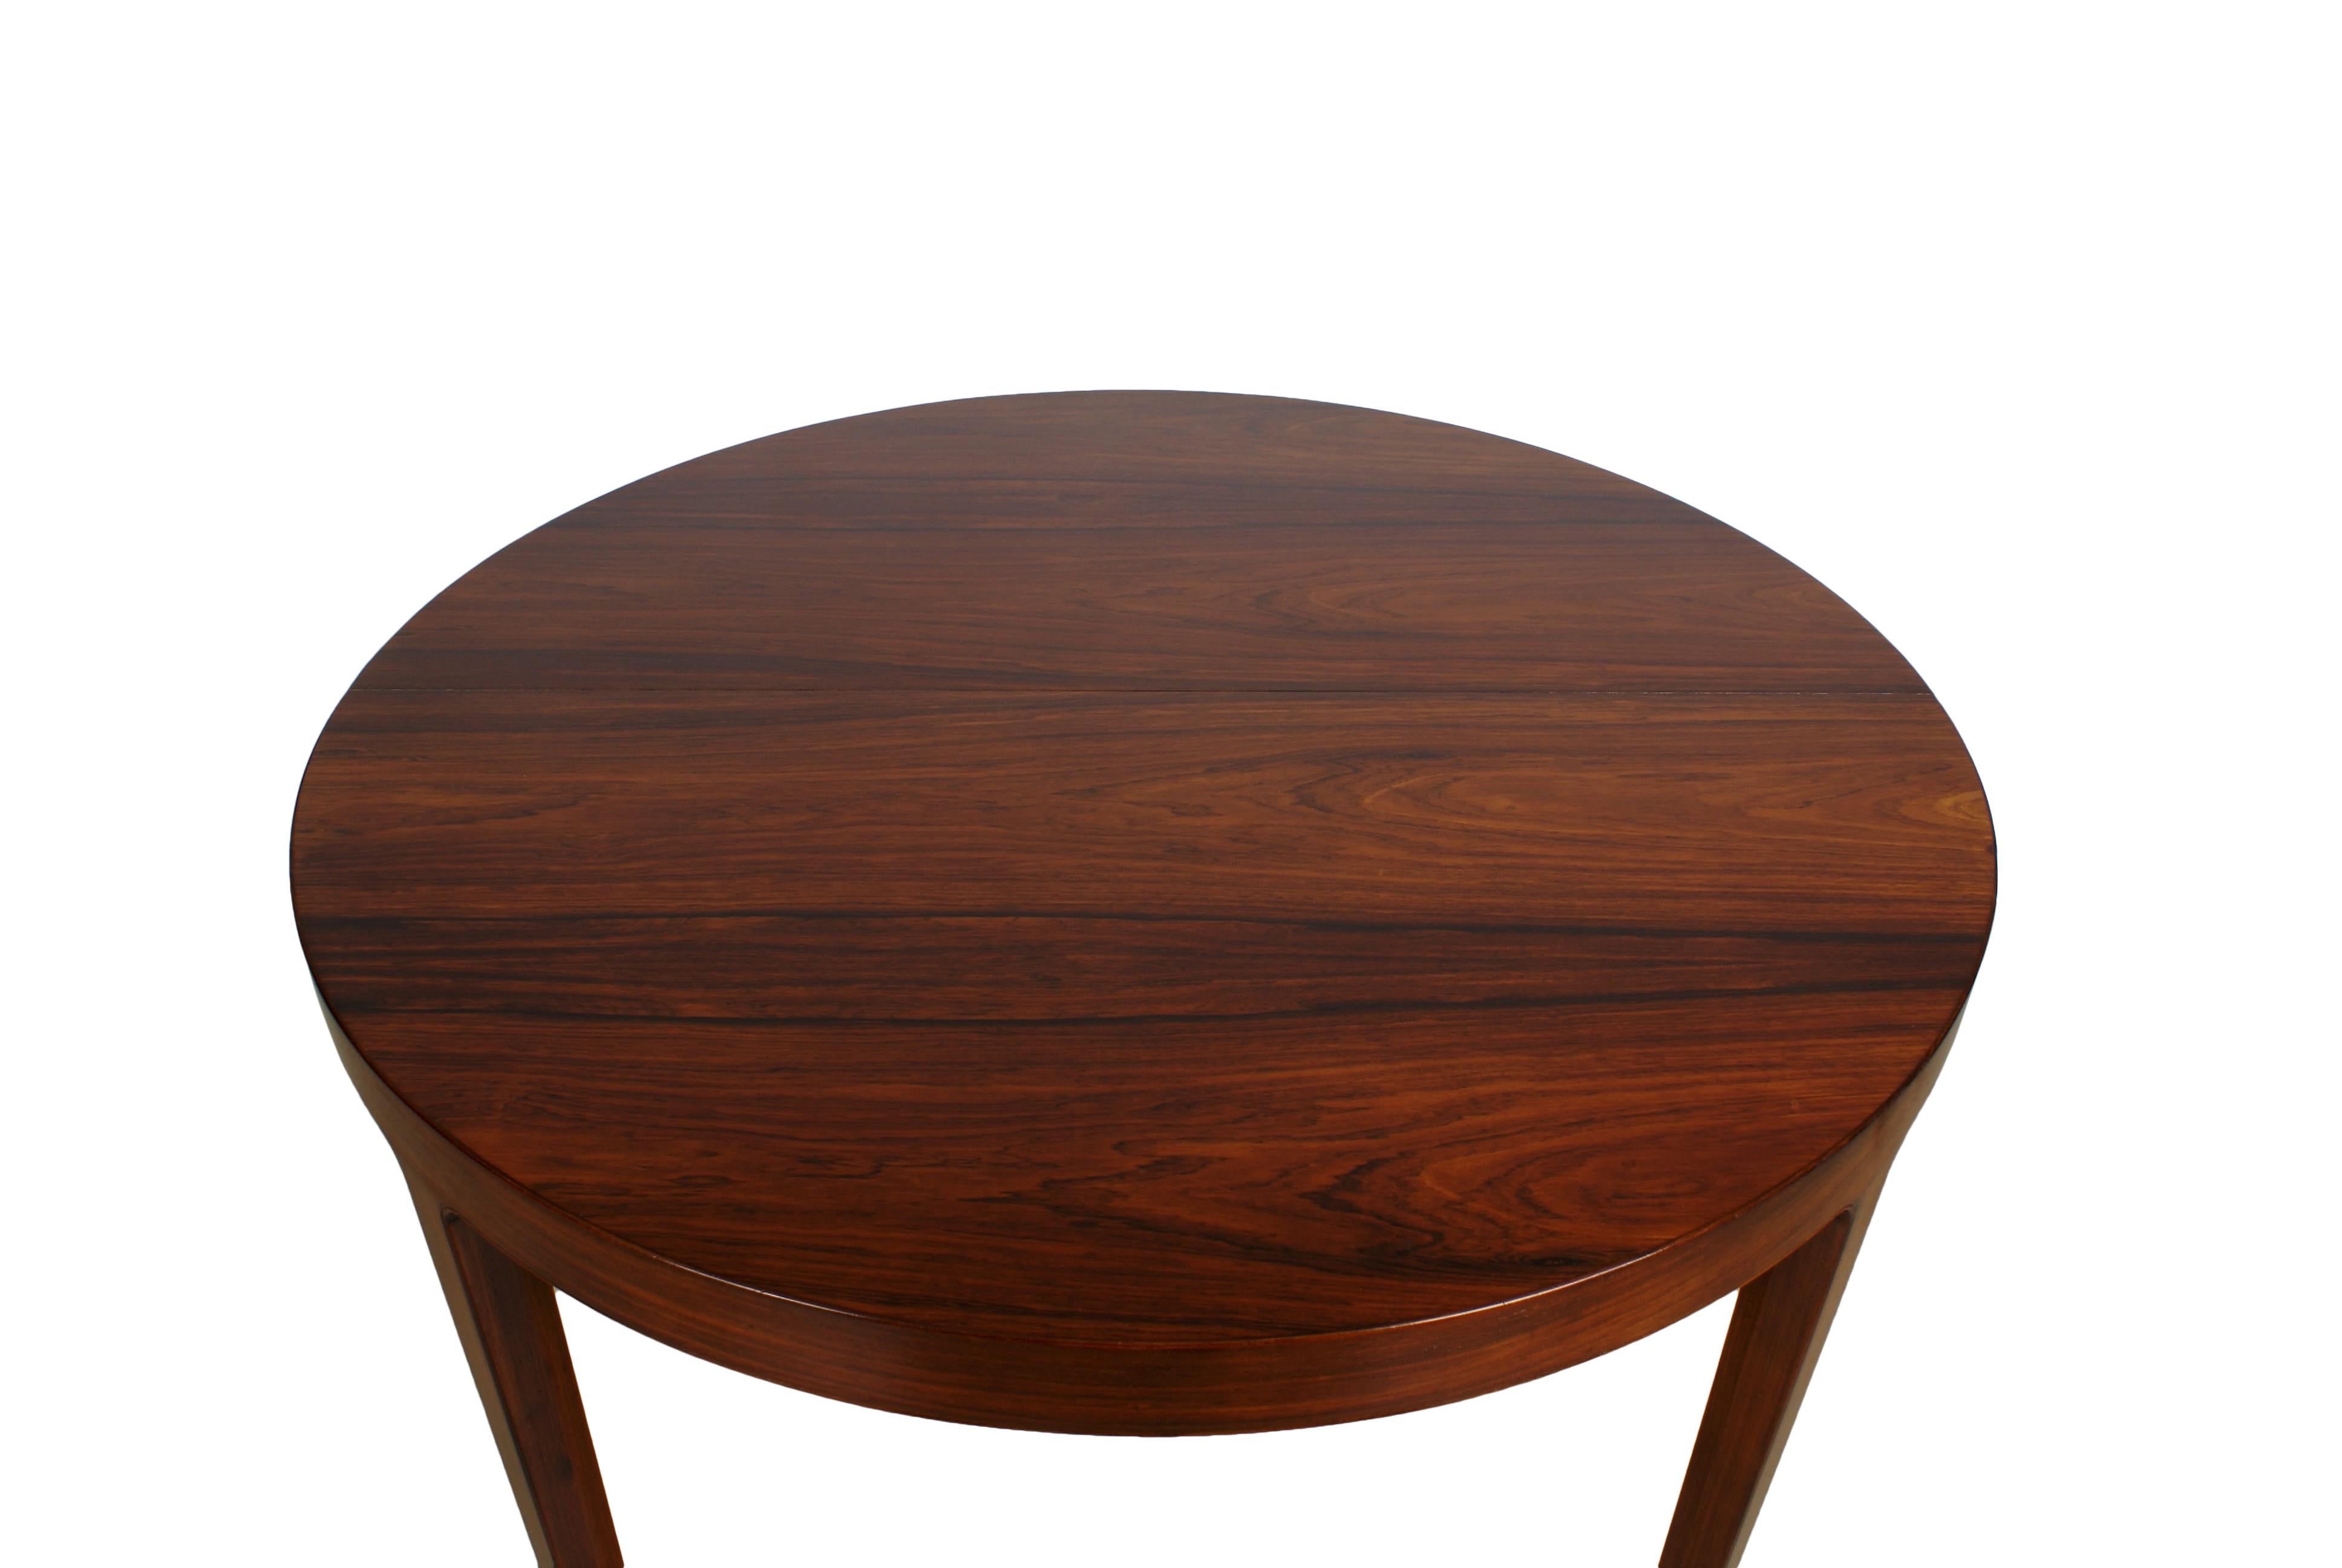 Danish Ole Wanscher Dining Table in Rosewood by Cabinetmaker A.J. Iversen, 1942